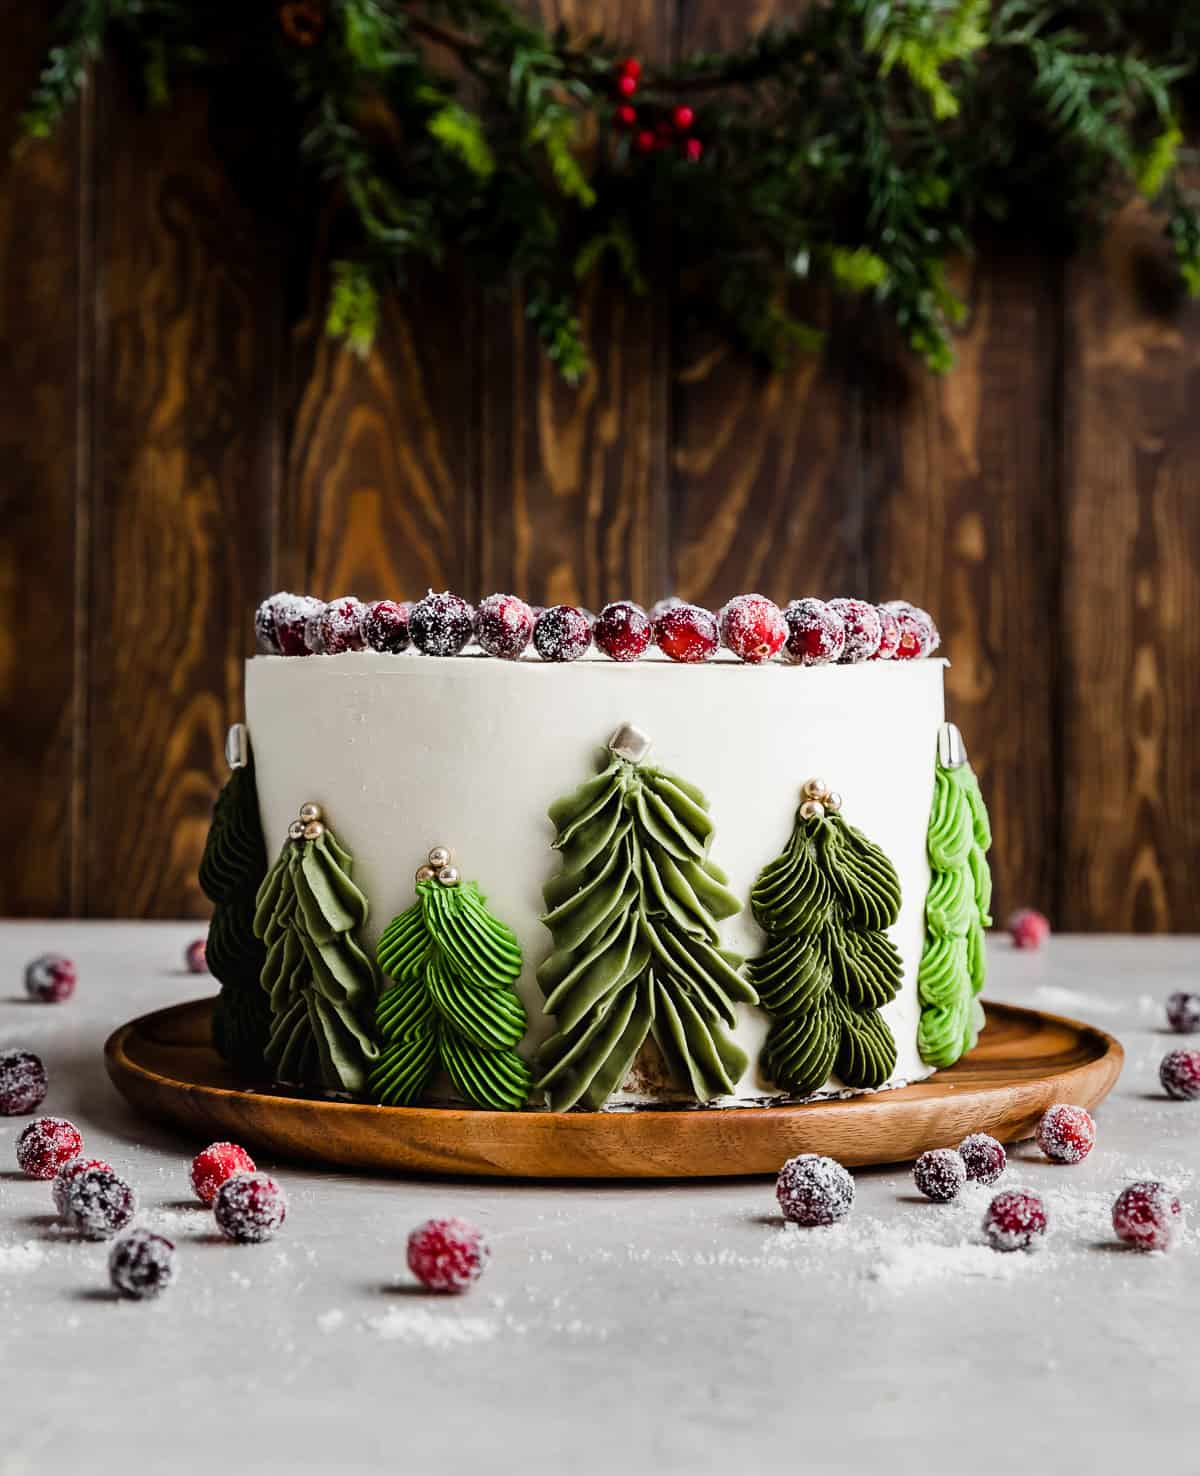 An orange cranberry cake with Christmas Trees piped on the sides of the cake.